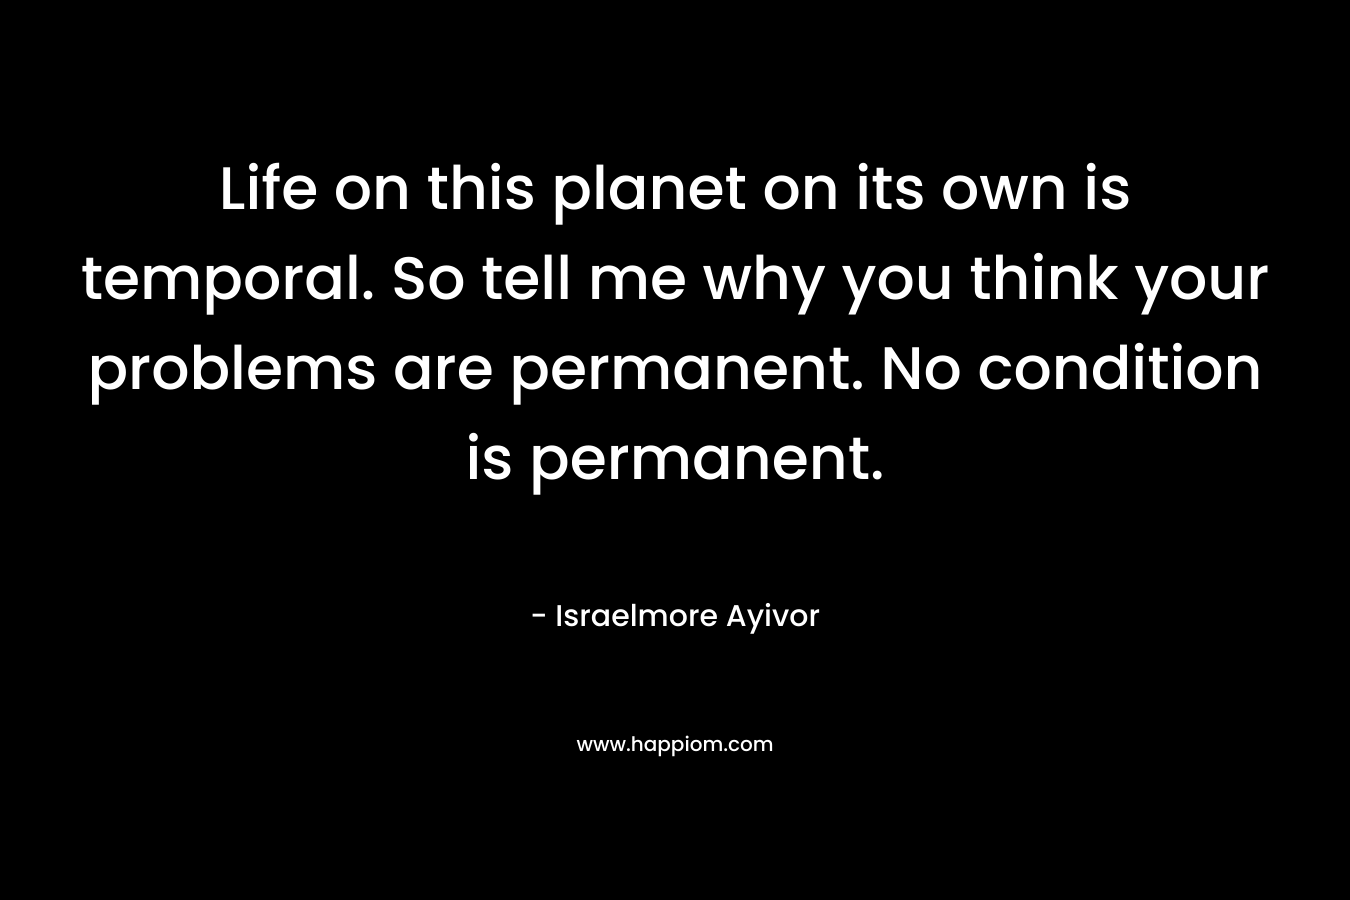 Life on this planet on its own is temporal. So tell me why you think your problems are permanent. No condition is permanent.